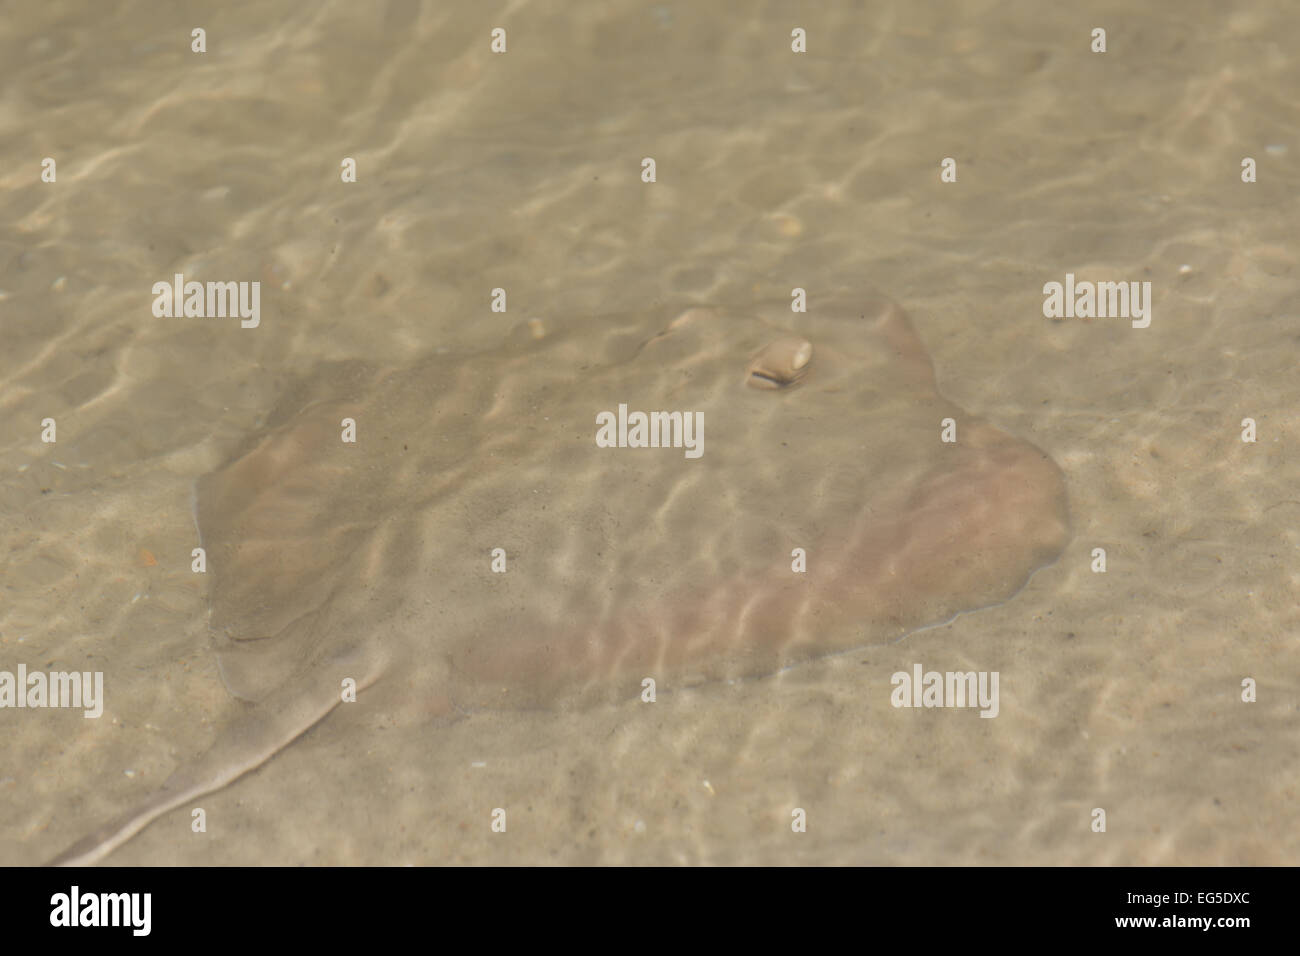 A photograph of a Common Stingaree in Lake Macquarie, NSW, Australia. The common stingaree is a species of stingray. Stock Photo